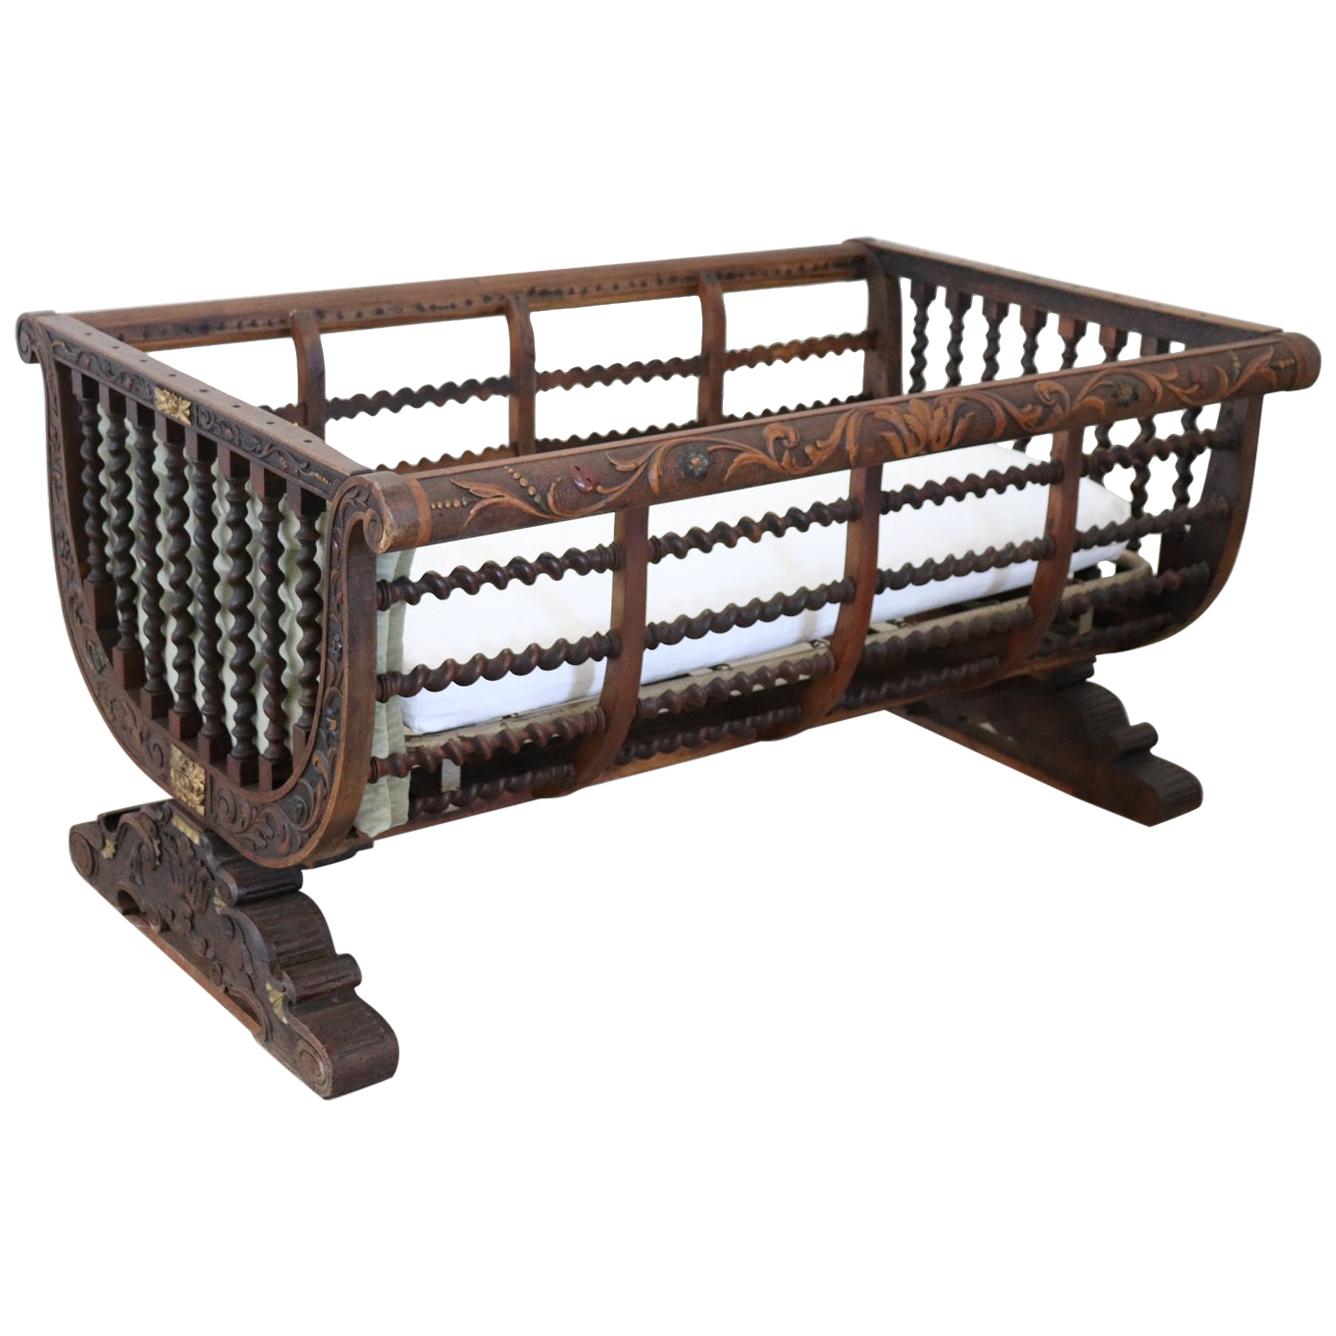 19th Century Italian Antique Carved and Turned Walnut Crib or Baby Bed